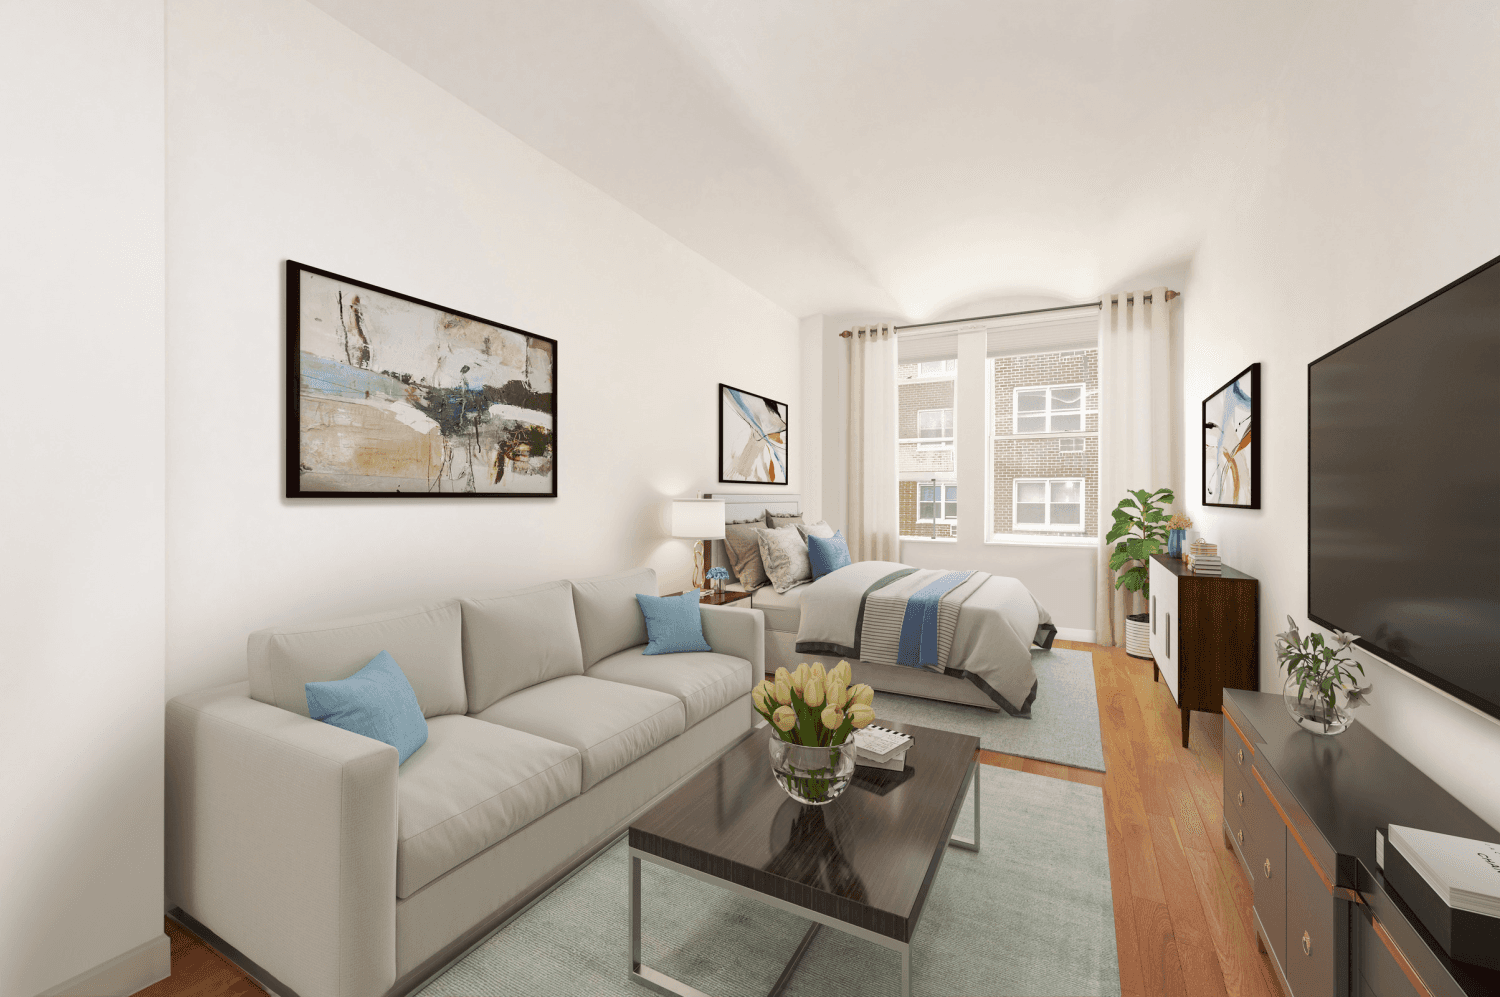 Experience the opportunity to live in one of NYC's most coveted areas with this Vintage Printing Factory Apartment, located at the prime intersection of West 4th and Barrow in the ...